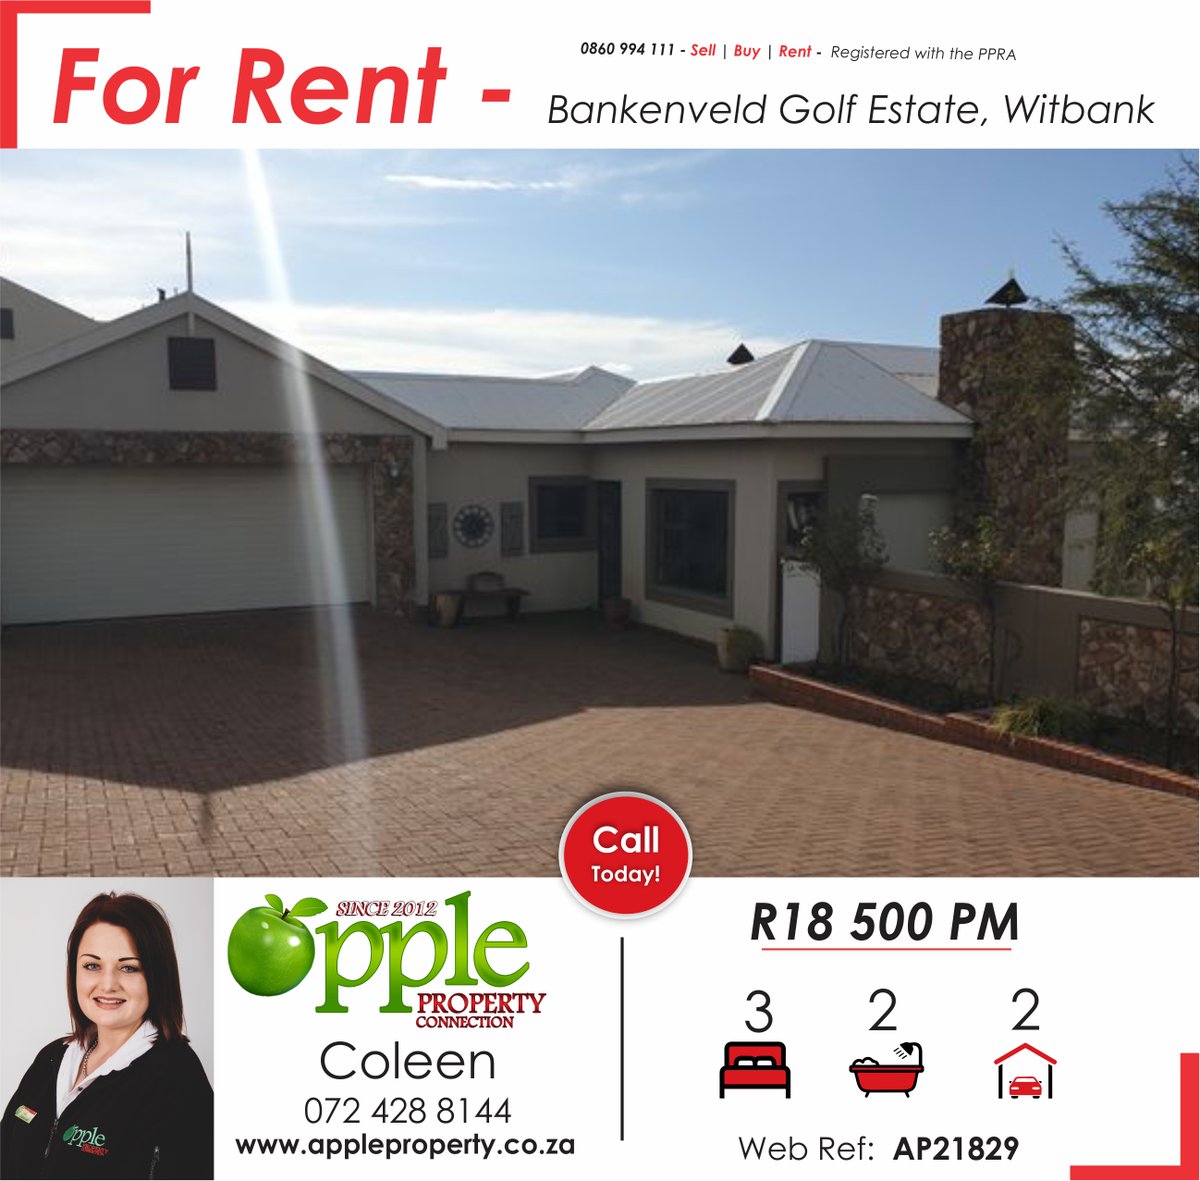 🎉⭐😎🏡🥳🤩 
Your dream home has just been listed!
Don't let this opportunity pass you by!

#justlisted #forsale #forrent #residentialproperty #newdevelopments #commercialproperty #nationwide #ApplePropertyConnection #ApplePropertyConnection
appleproperty.co.za